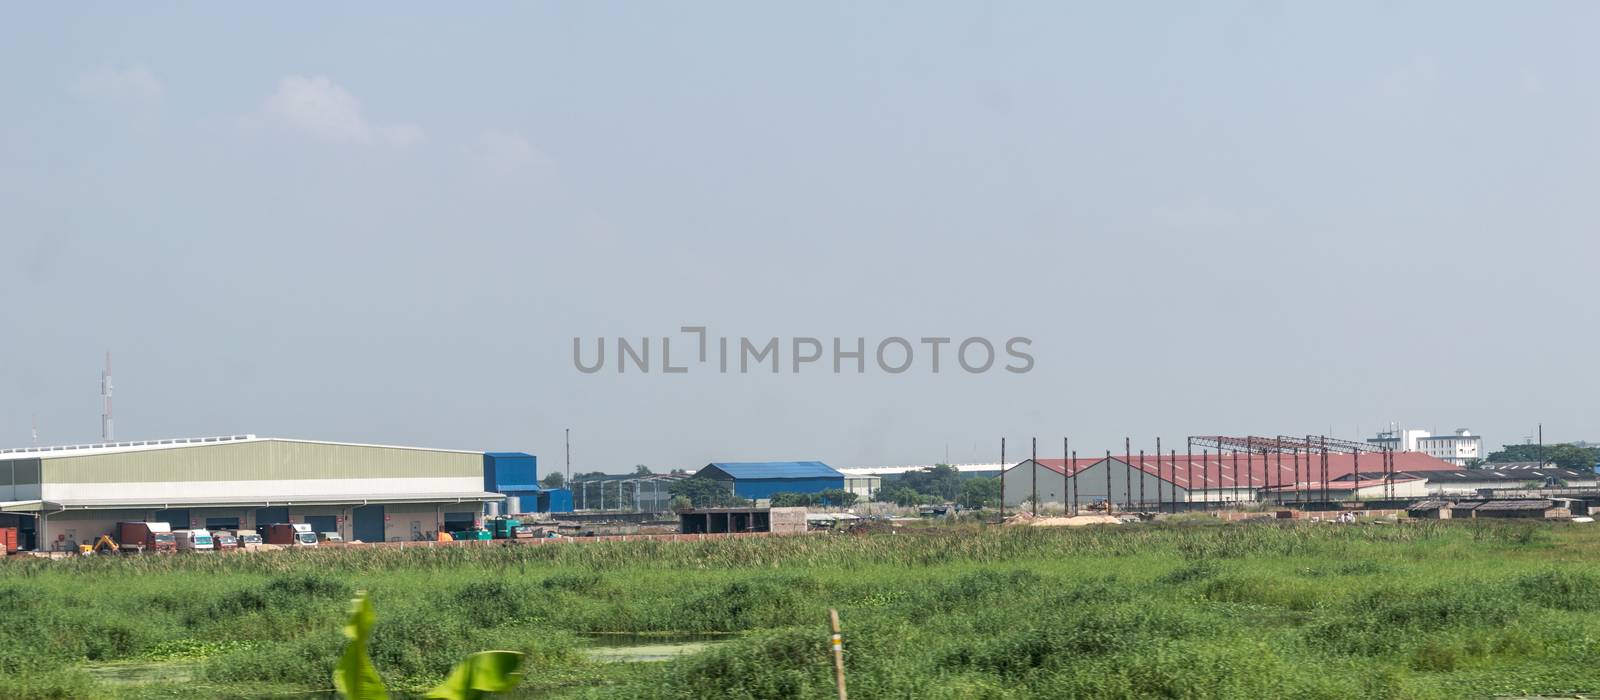 Industrial site power plant landscape. Industry surrounded by rural agricultural field and green summer meadow. A beautiful non-urban scenic environment of Rural Countryside of India, south asia pac.